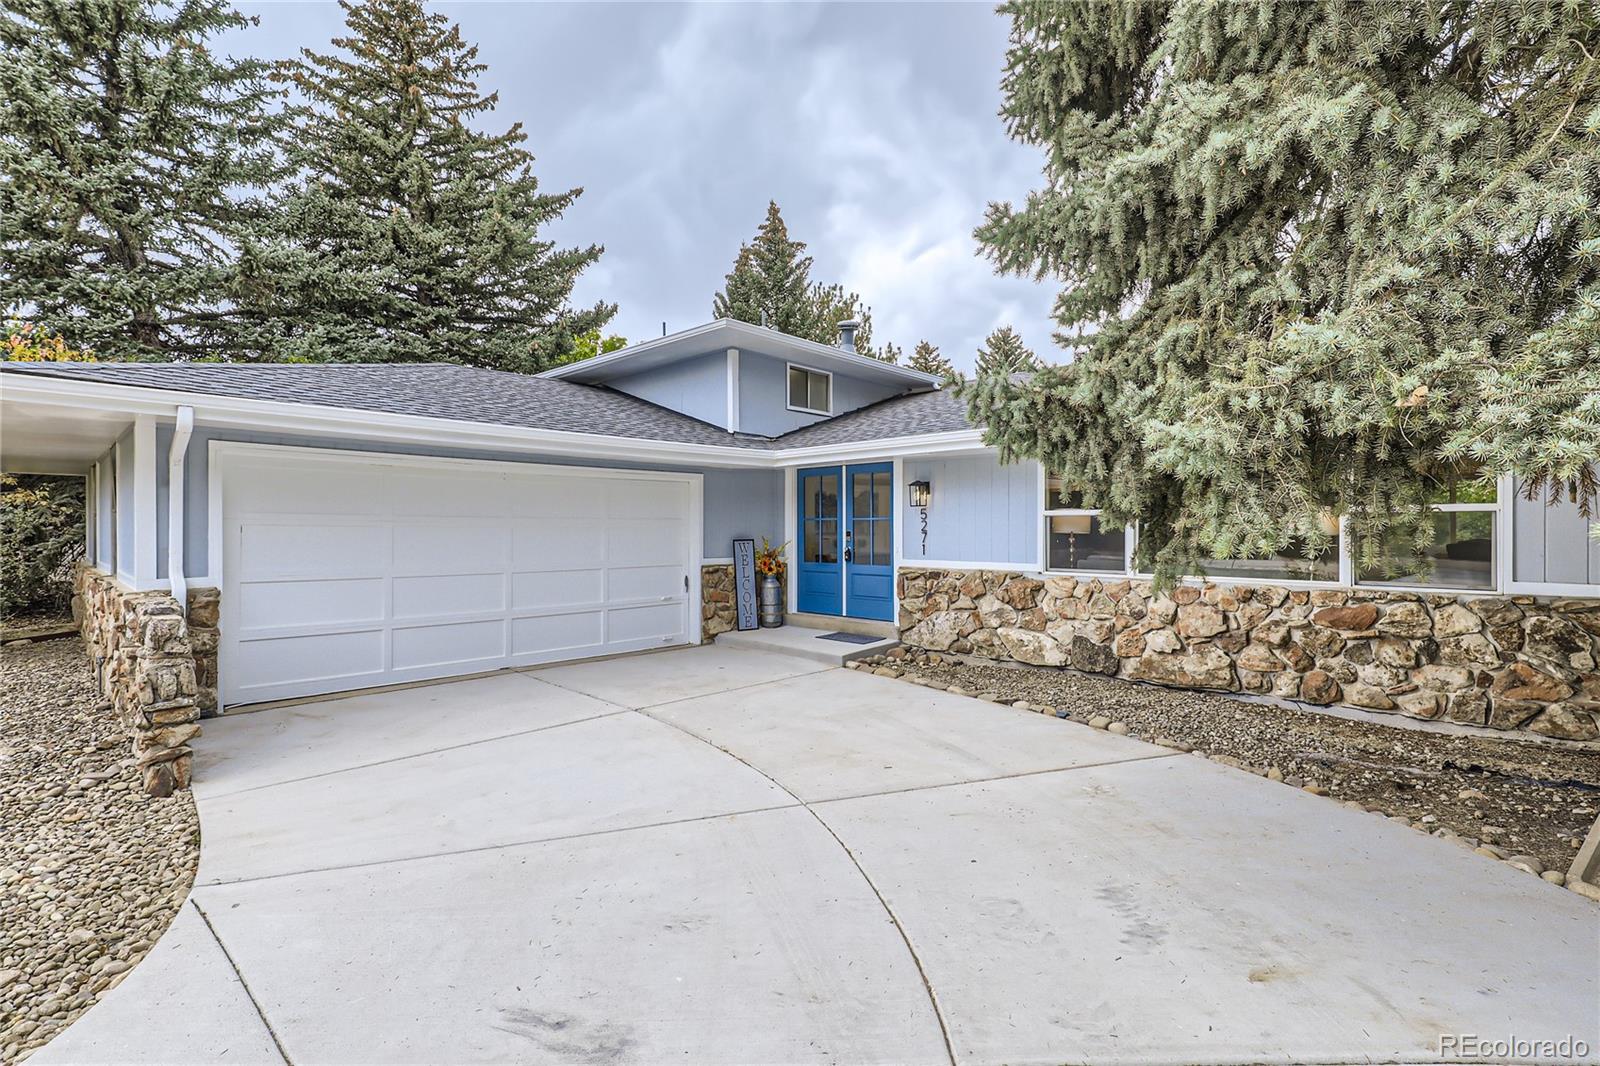 5271  Spotted Horse Trail Trail, boulder MLS: 8151812 Beds: 4 Baths: 3 Price: $875,000